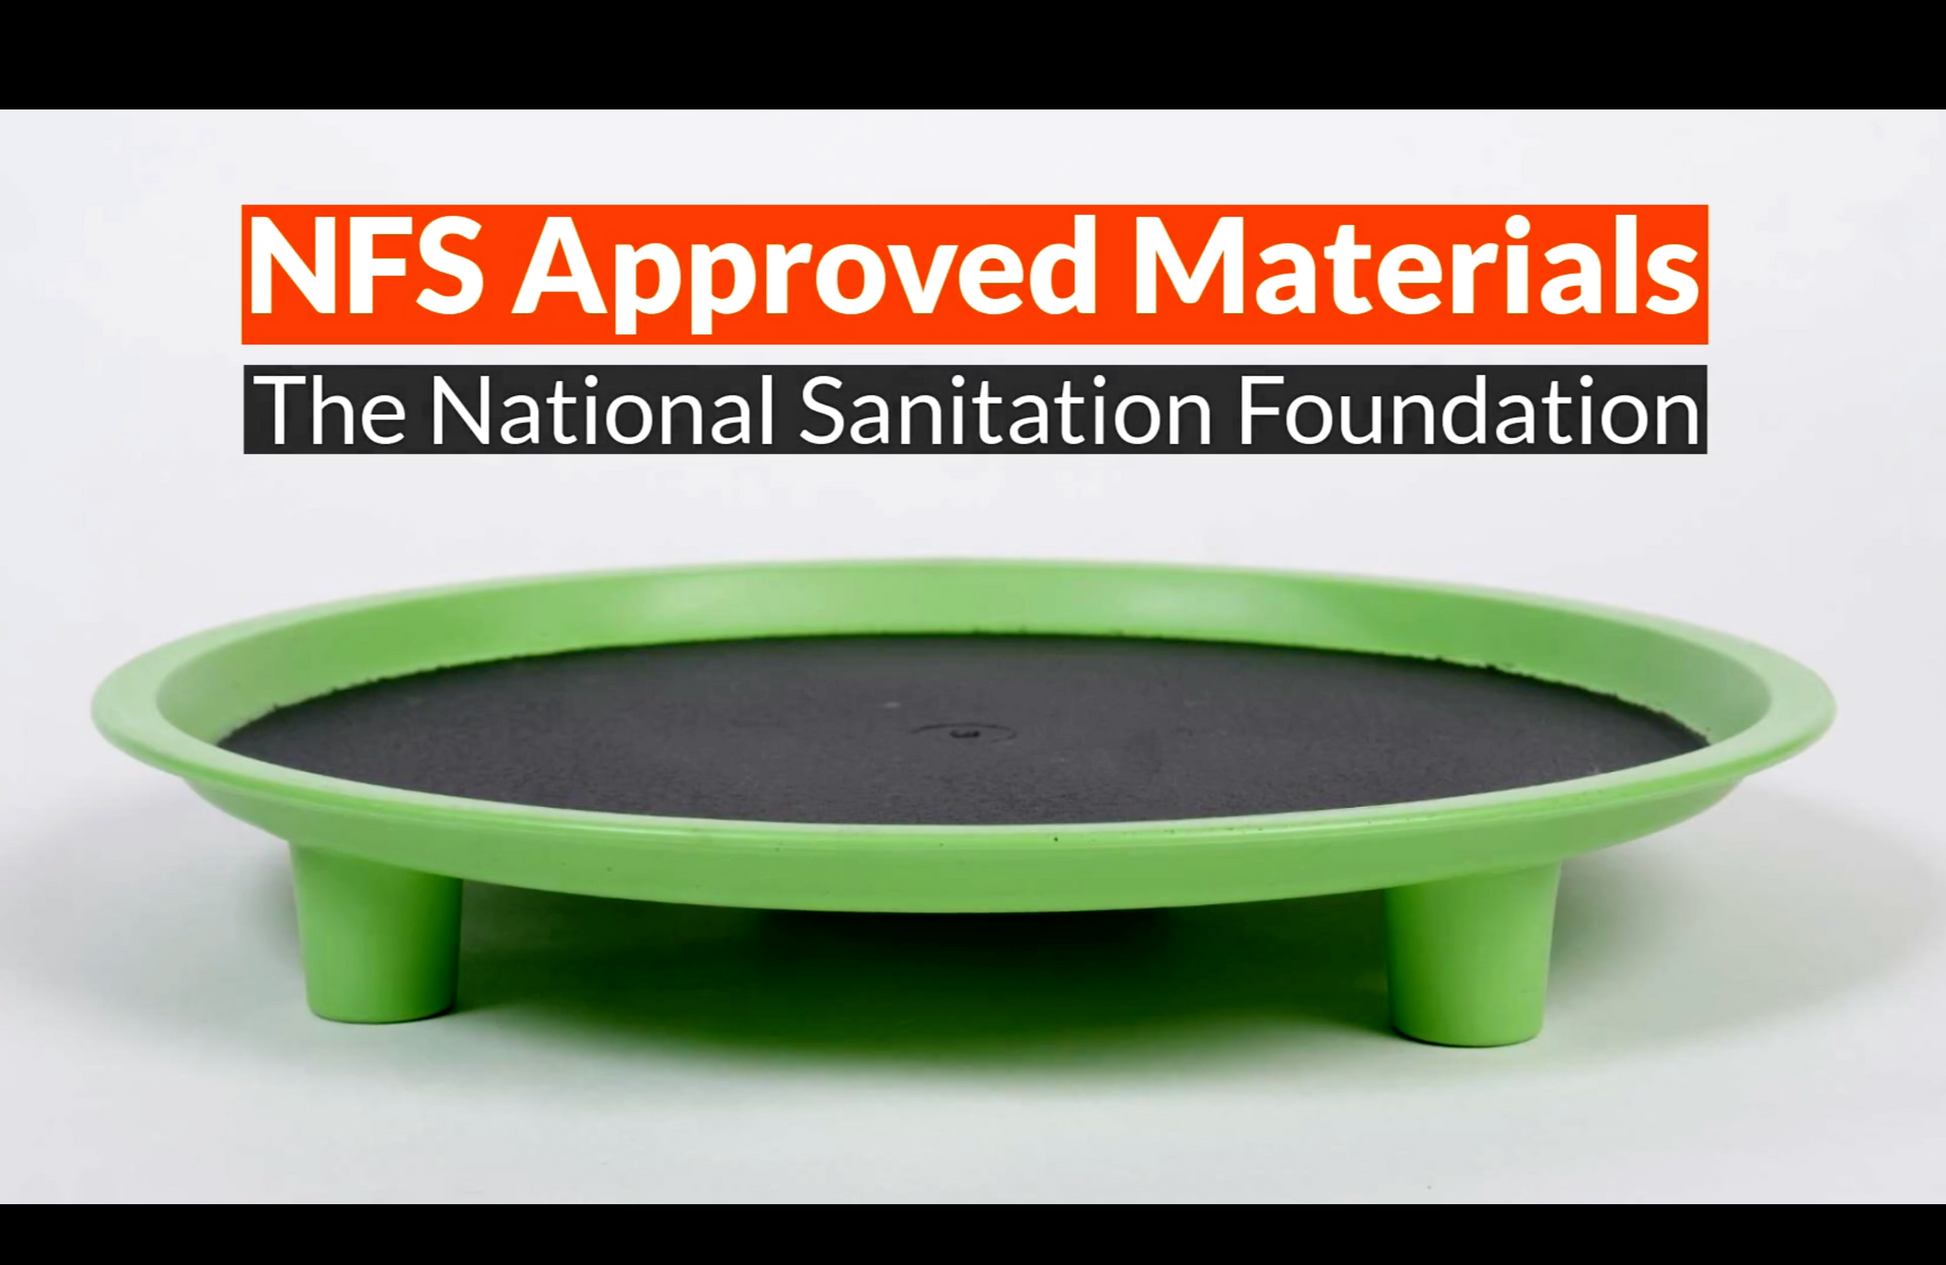 Our tray is made from  NSF approved materials